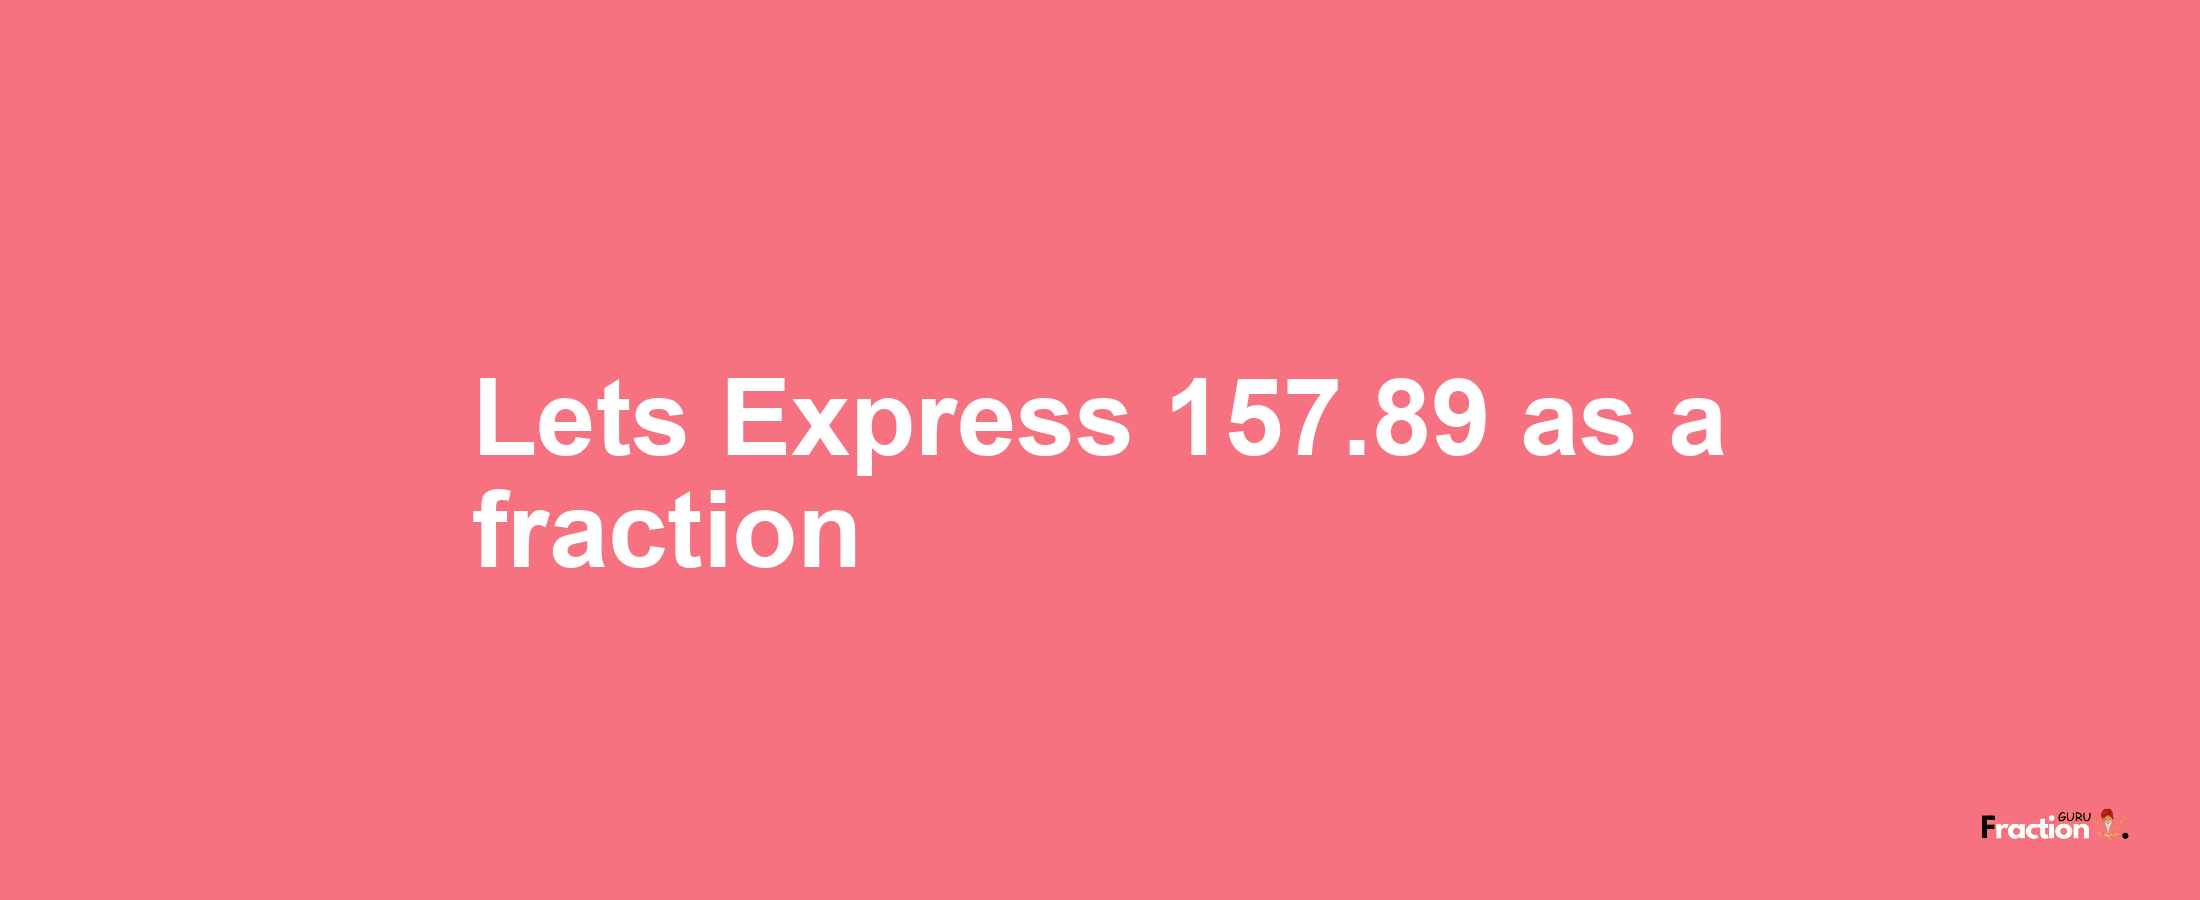 Lets Express 157.89 as afraction